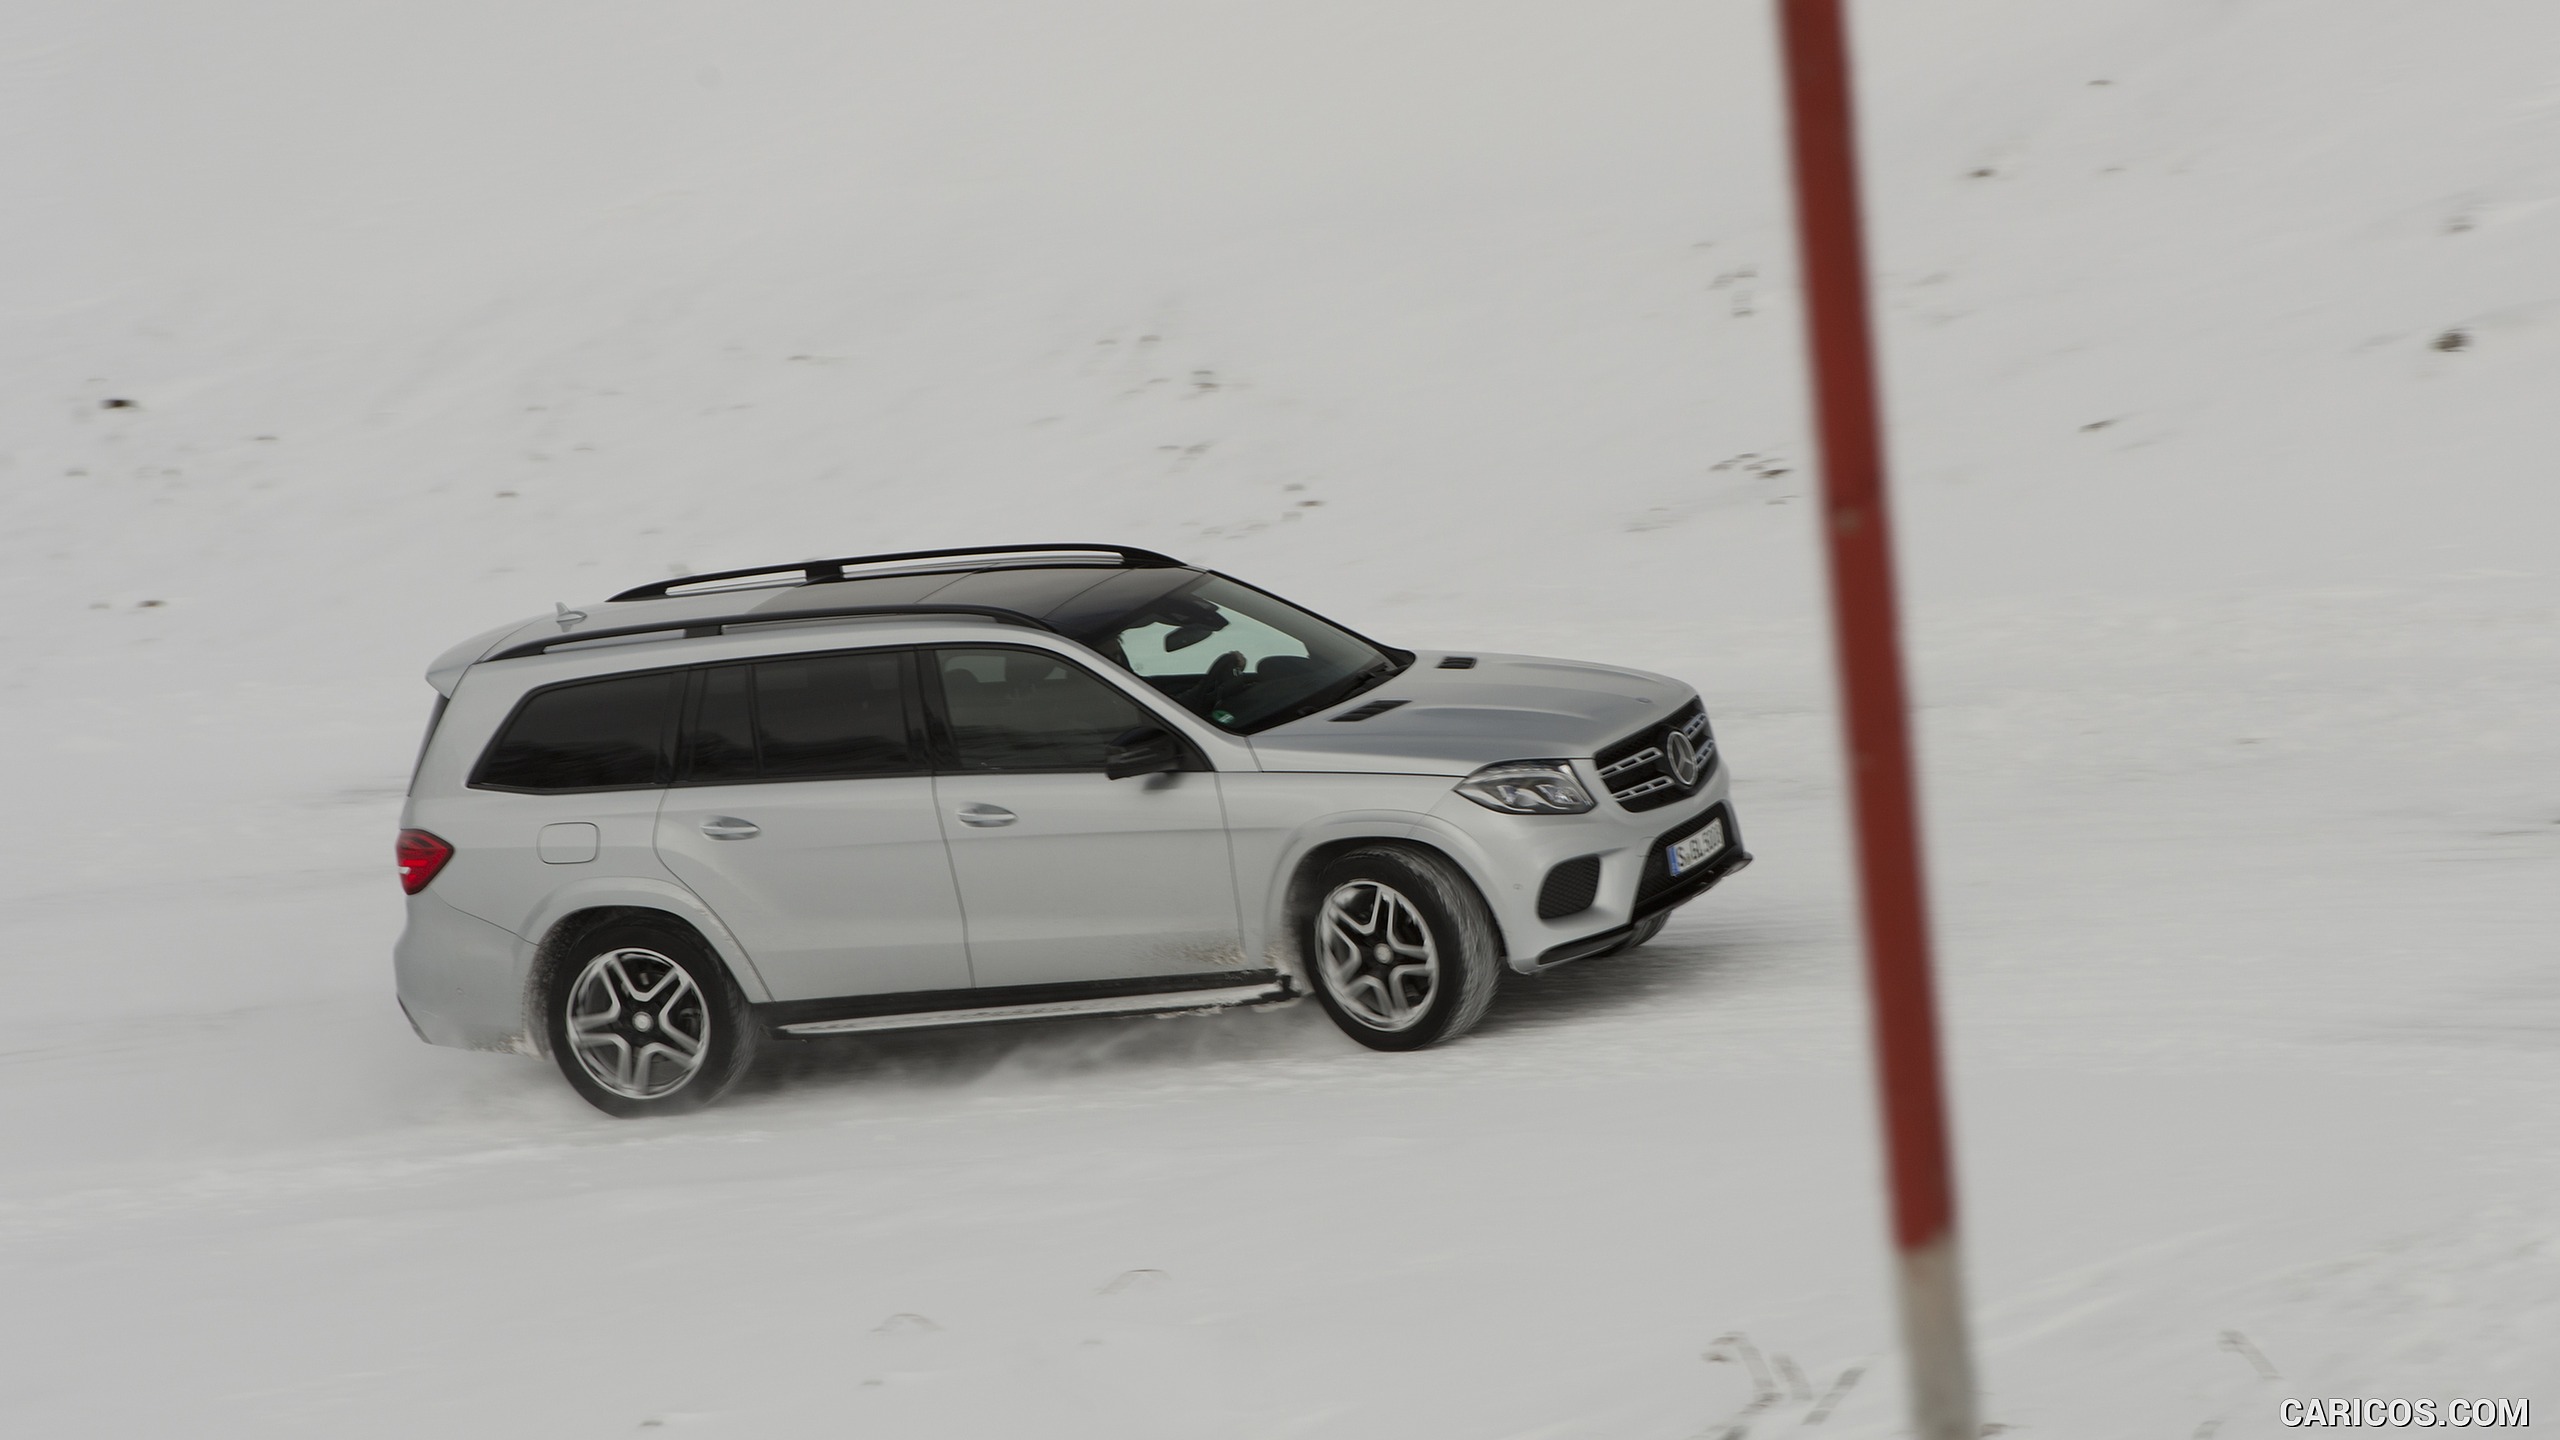 2017 Mercedes-Benz GLS 500 4MATIC AMG Line in Snow - Side, #155 of 255